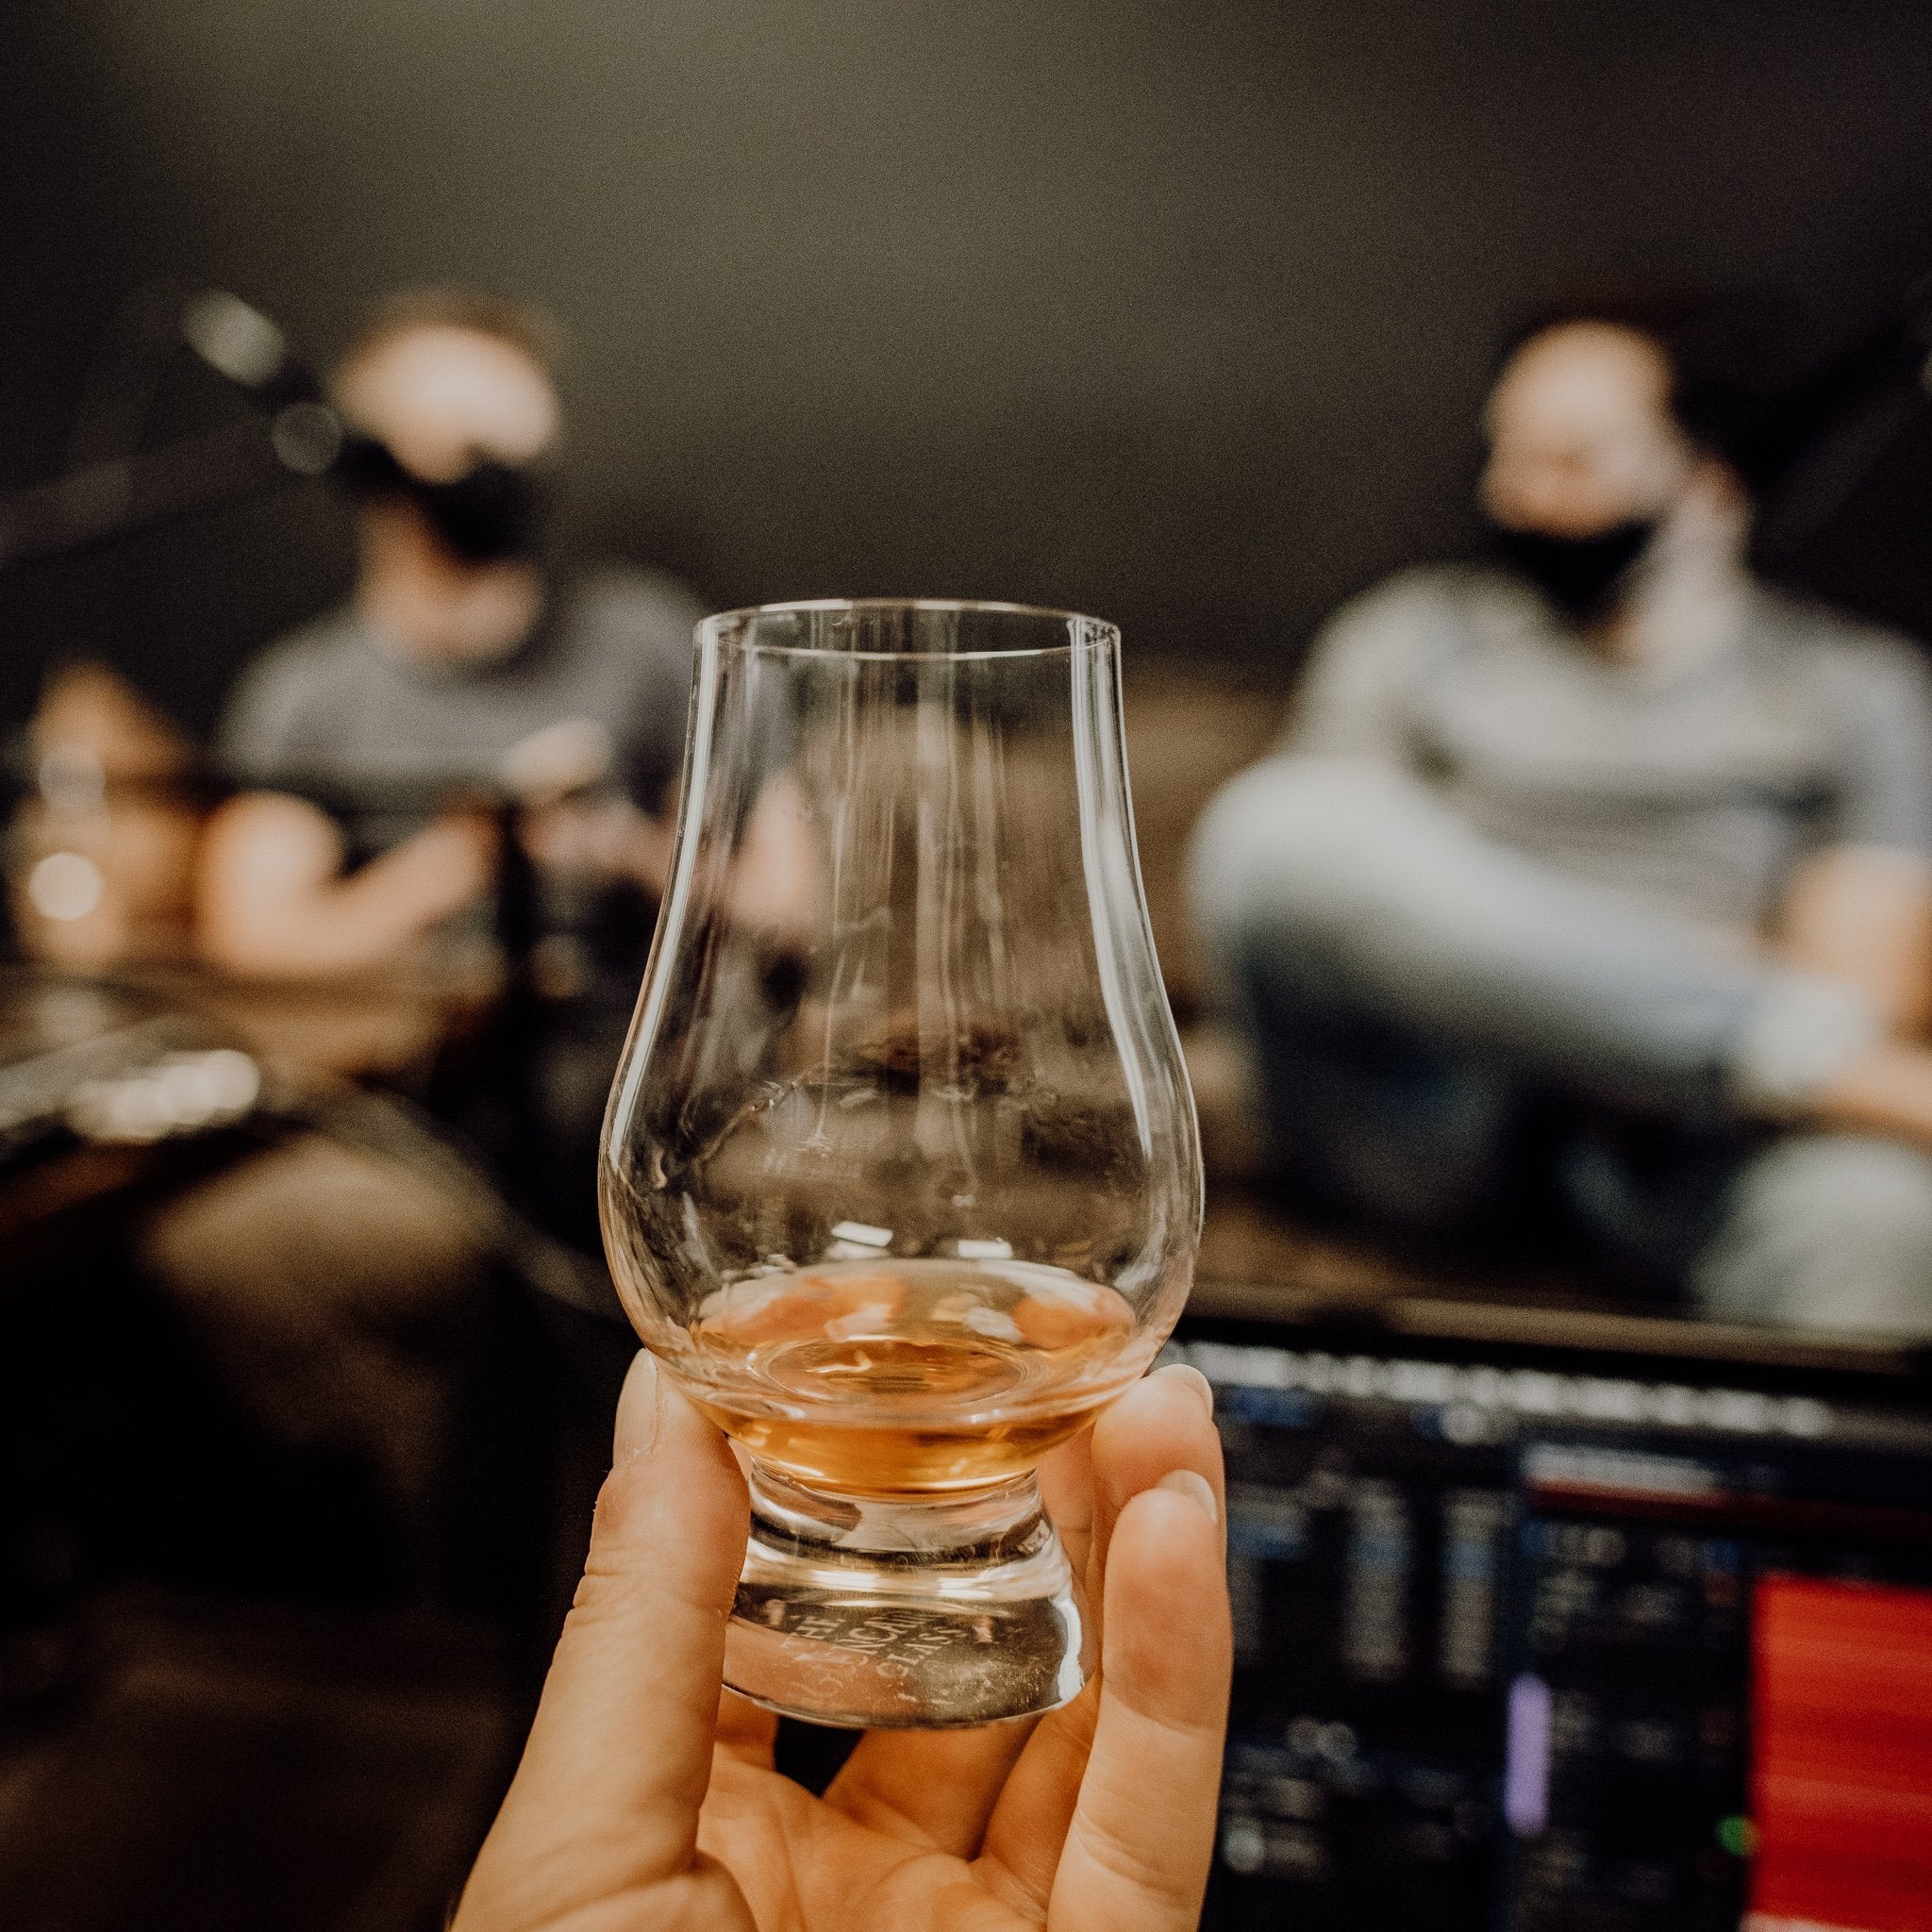 Send Whiskey #21 - The Sustainability of Bartending as a Career